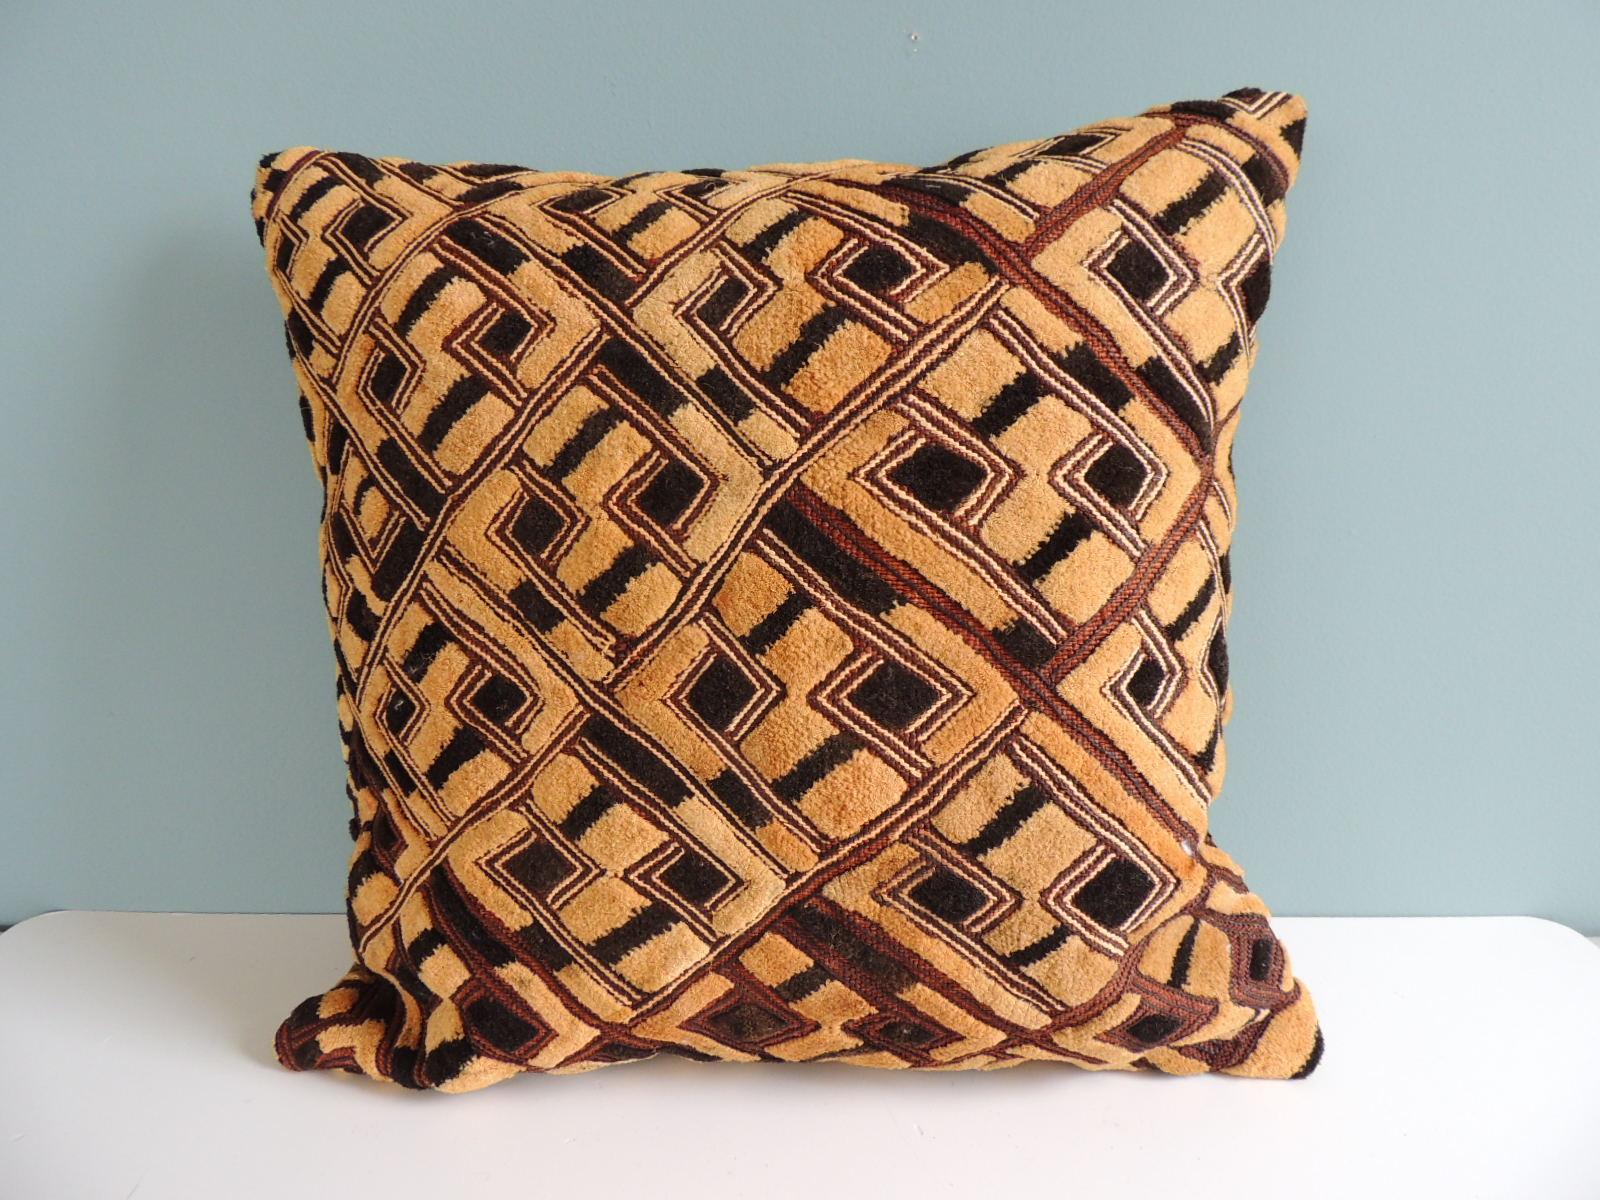 Vintage black and tan Raffia Velvet Kuba African square decorative Pillow with chenille cotton brown backing.
Decorative pillow handcrafted and designed in the USA.
Closure by stitch (no zipper closure) with custom-made feather/Down pillow